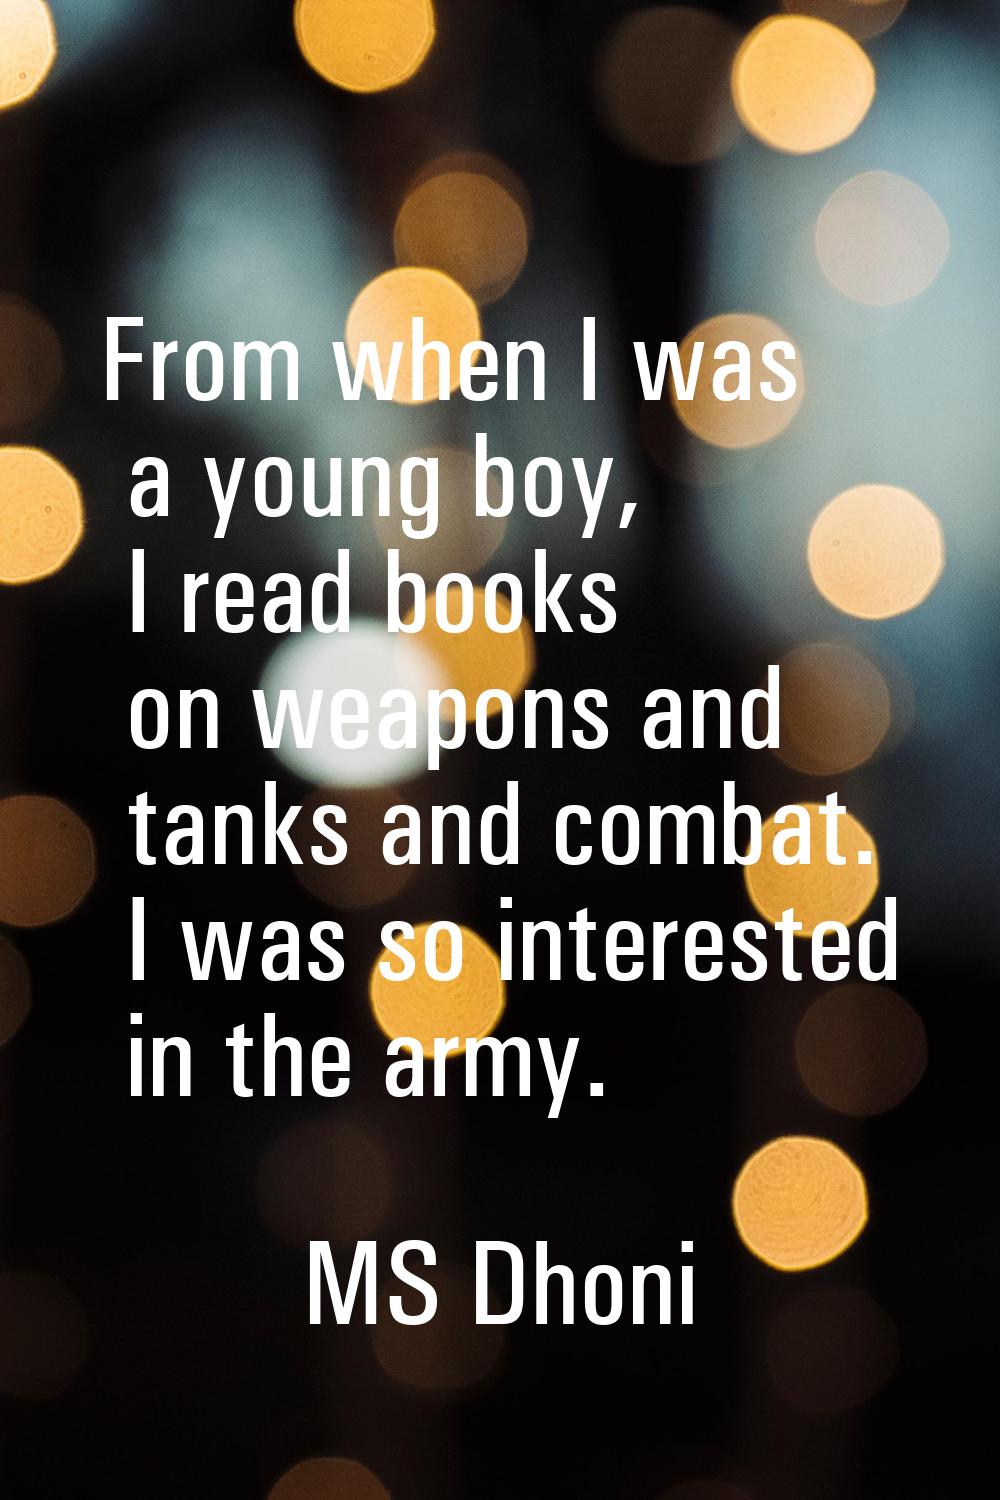 From when I was a young boy, I read books on weapons and tanks and combat. I was so interested in t